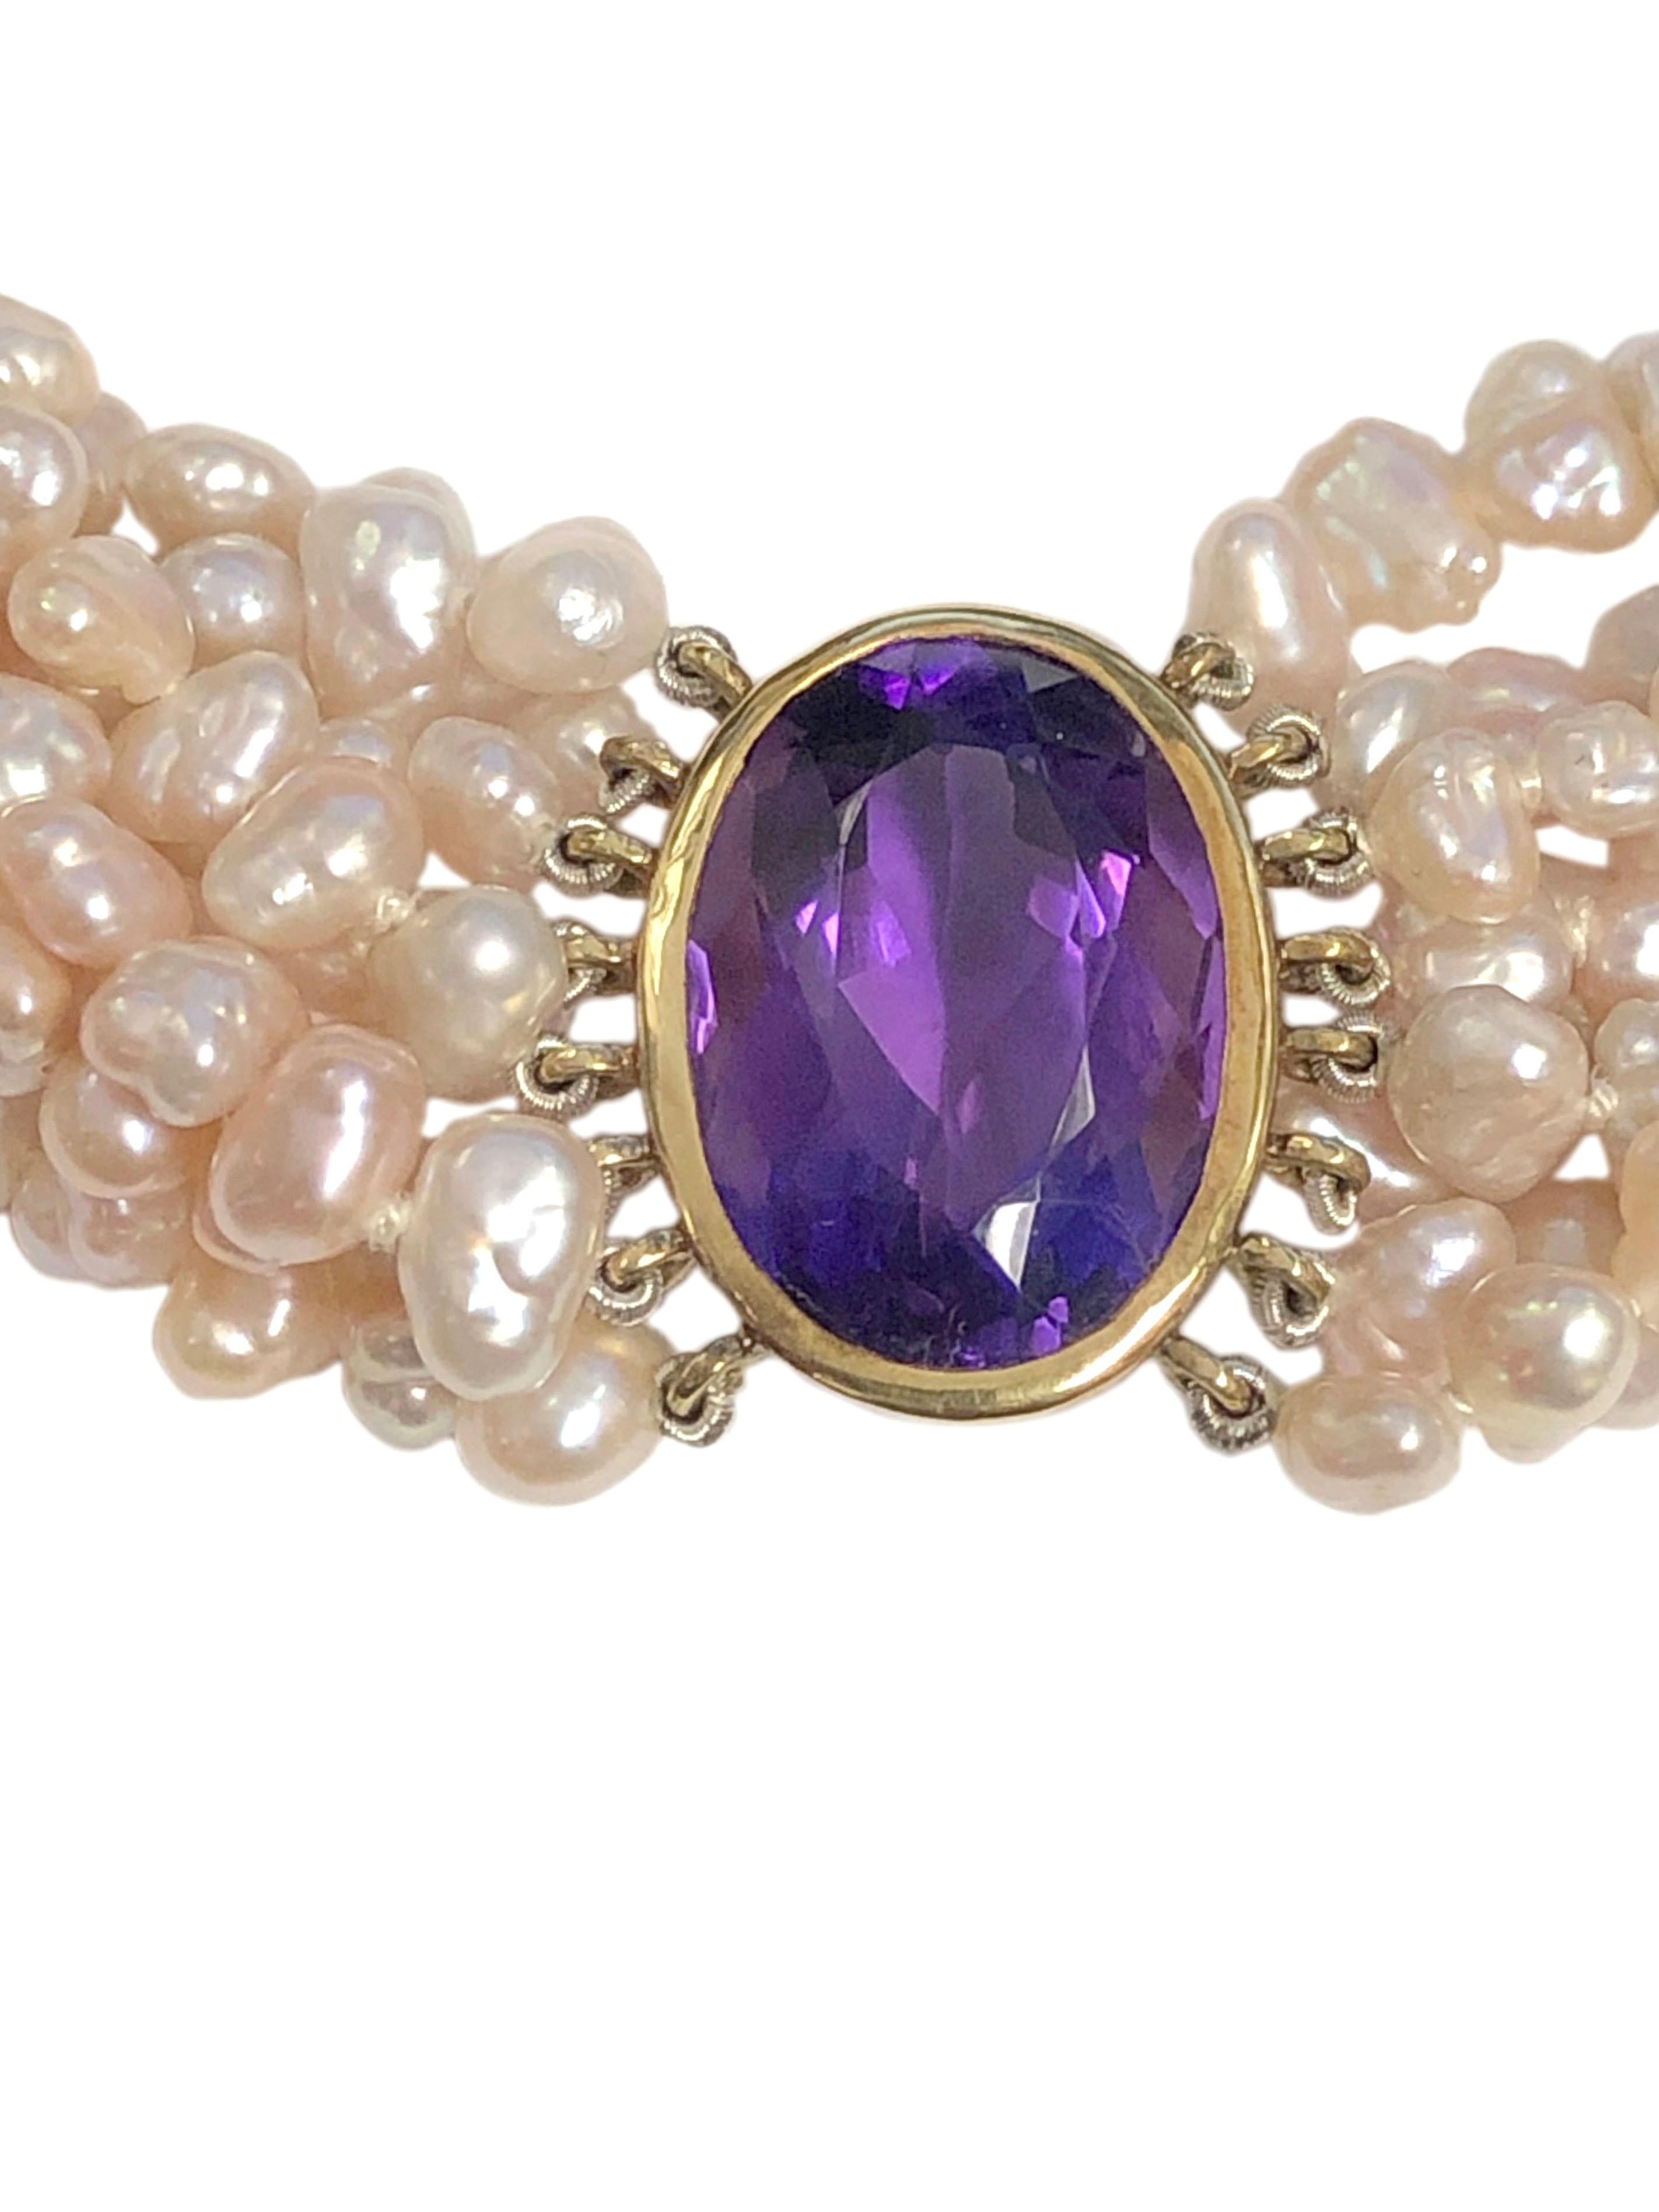 Circa 1990s Tiffany & Company Torsade Necklace, comprised of 8 strands of Natural fresh water pearls of various shapes measuring an average of 6 X 4 M.M. and having White Pink luster. Centrally set with an Oval Amethyst measuring 19 X 13 M.M. and